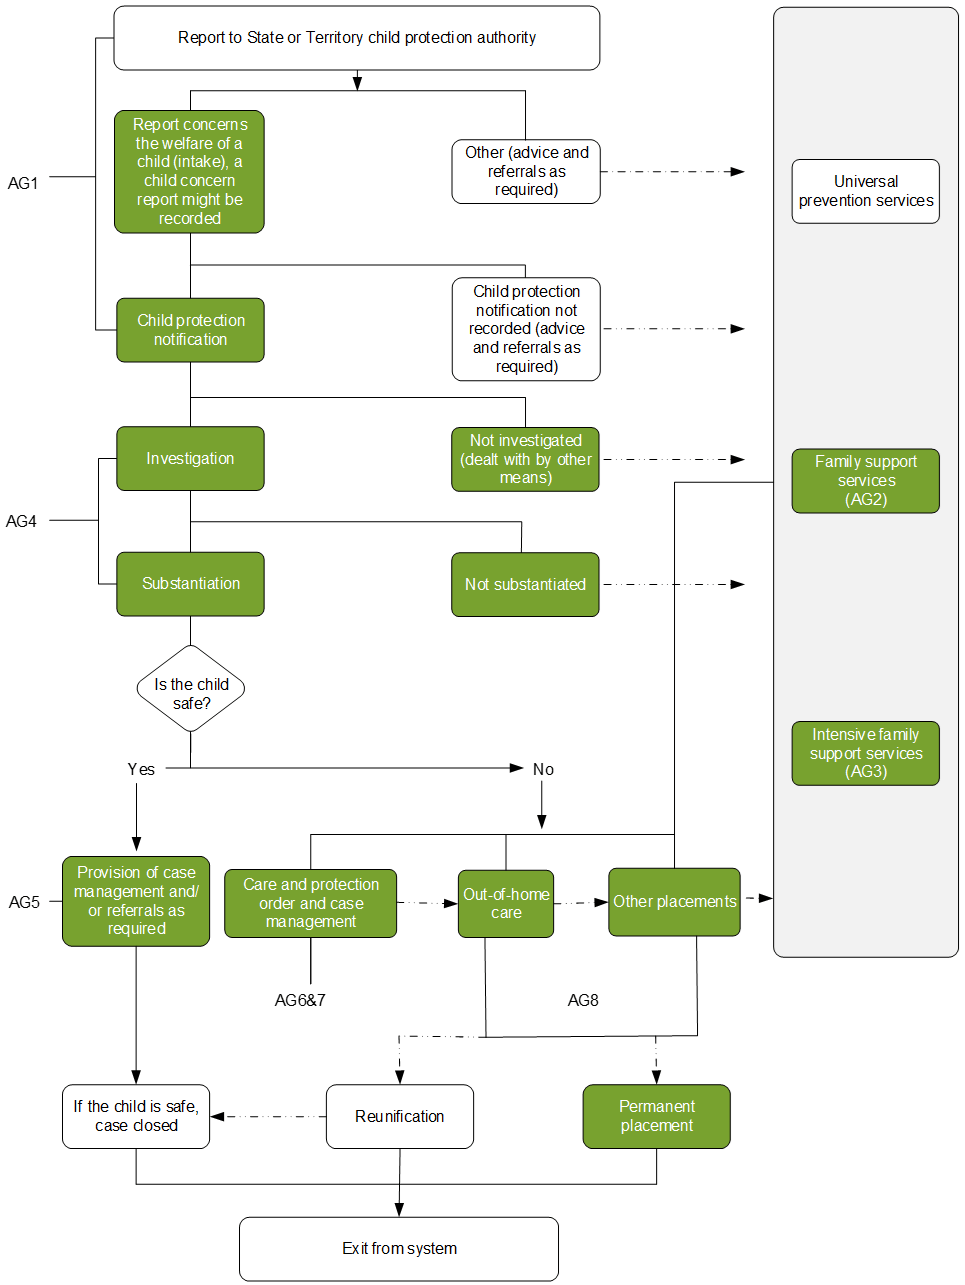 Figure 16.1 – The child protection services system. Diagram showing an overview of the child protection services system in Australia. The diagram depicts common pathways through the system and referrals to support services. More details can be found within the text surrounding this image.